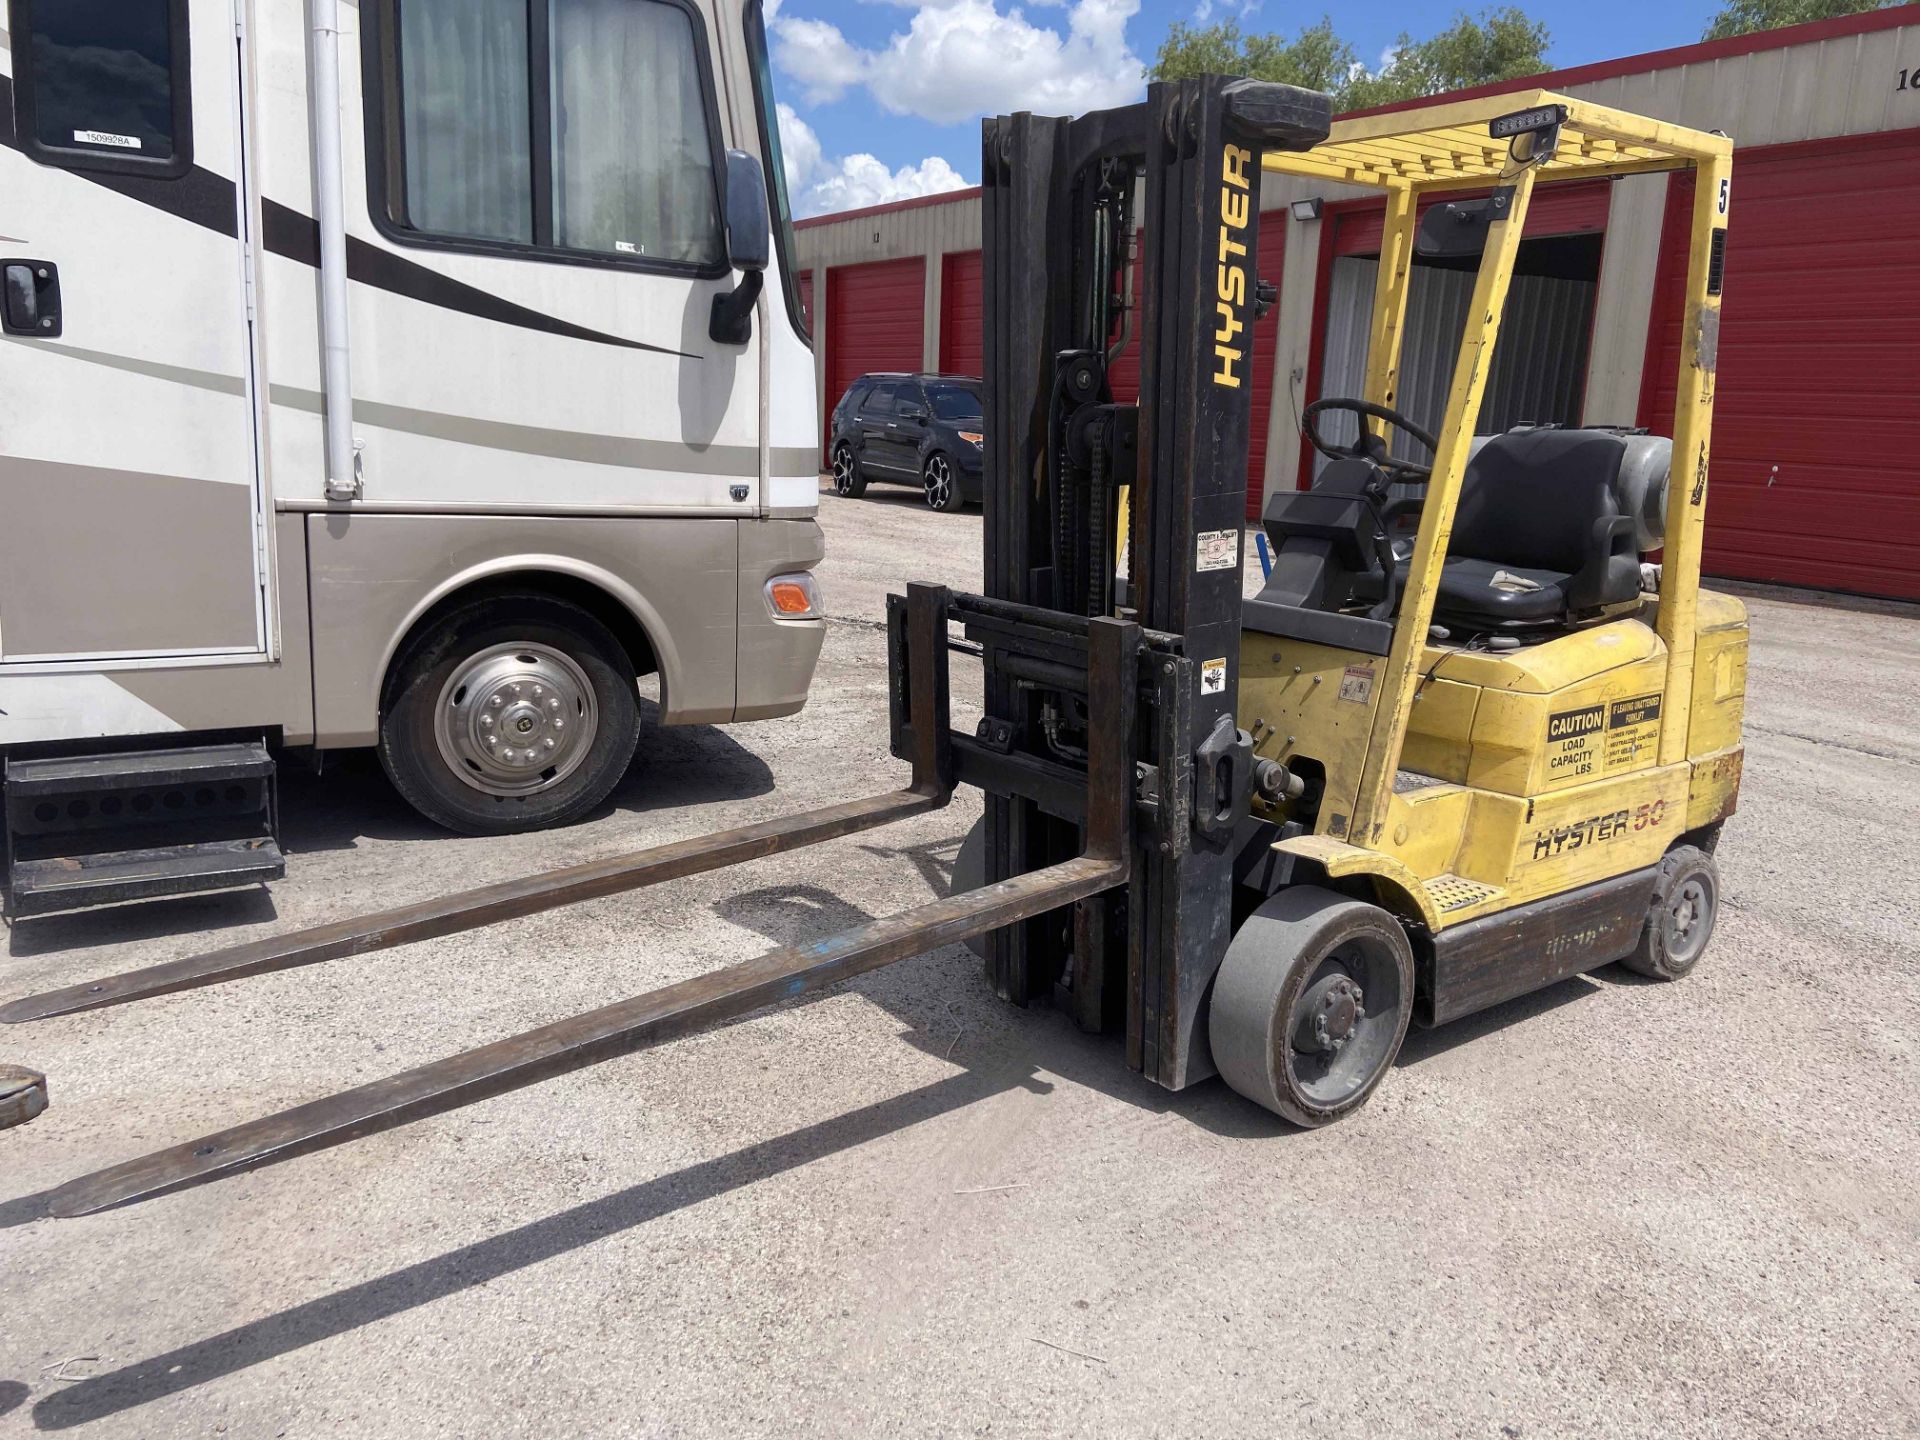 FORKLIFT, HYSTER S50XM, 5,000 LB. CAP., 189” lift ht., 3-stage mast, cushion tires, LP power, S/N